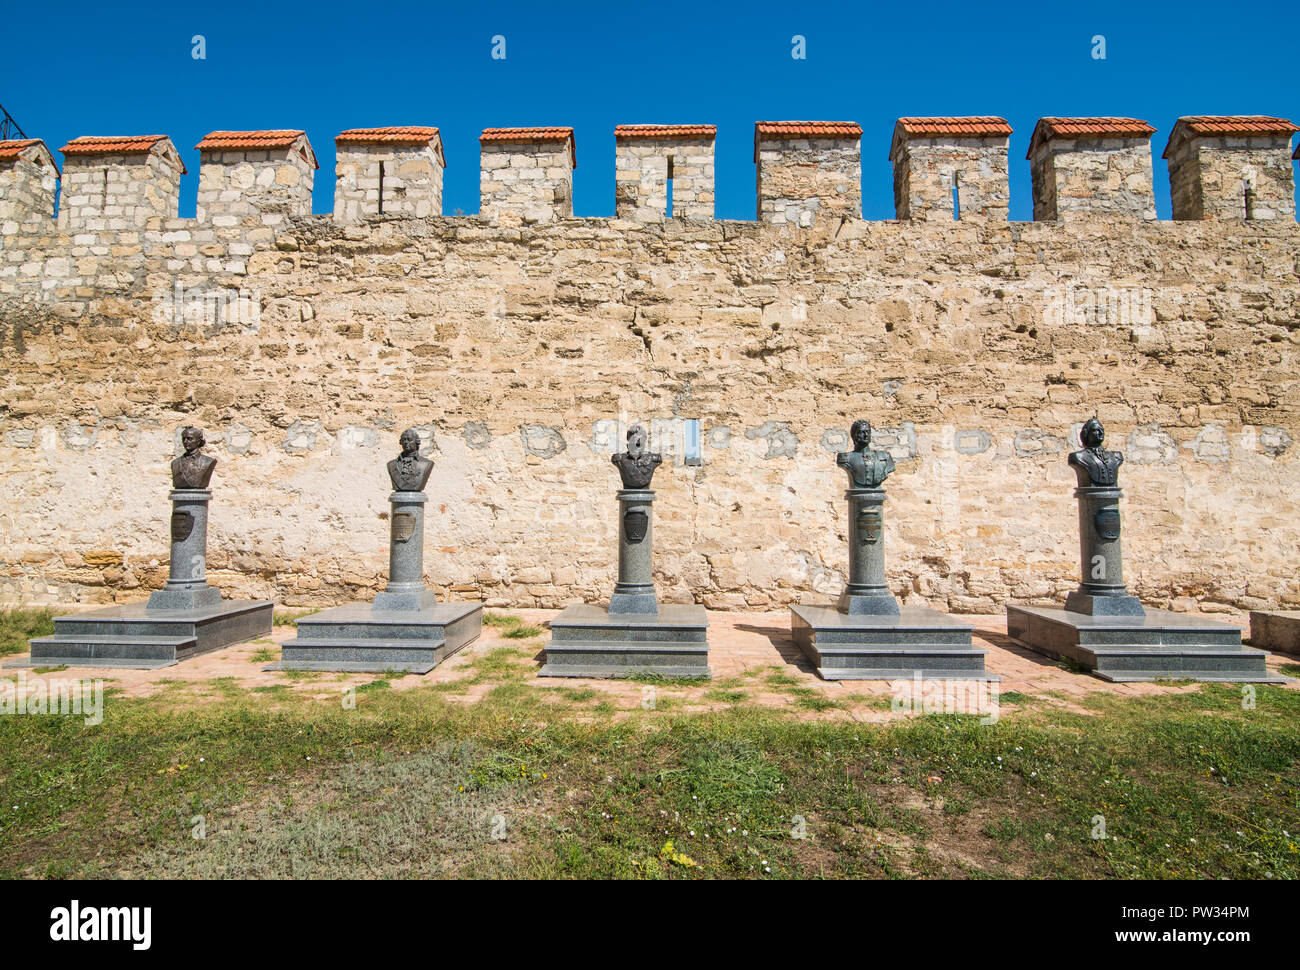 Heros statues before the Bender fortress, Bender, Republic of Transnistria, Moldova Stock Photo